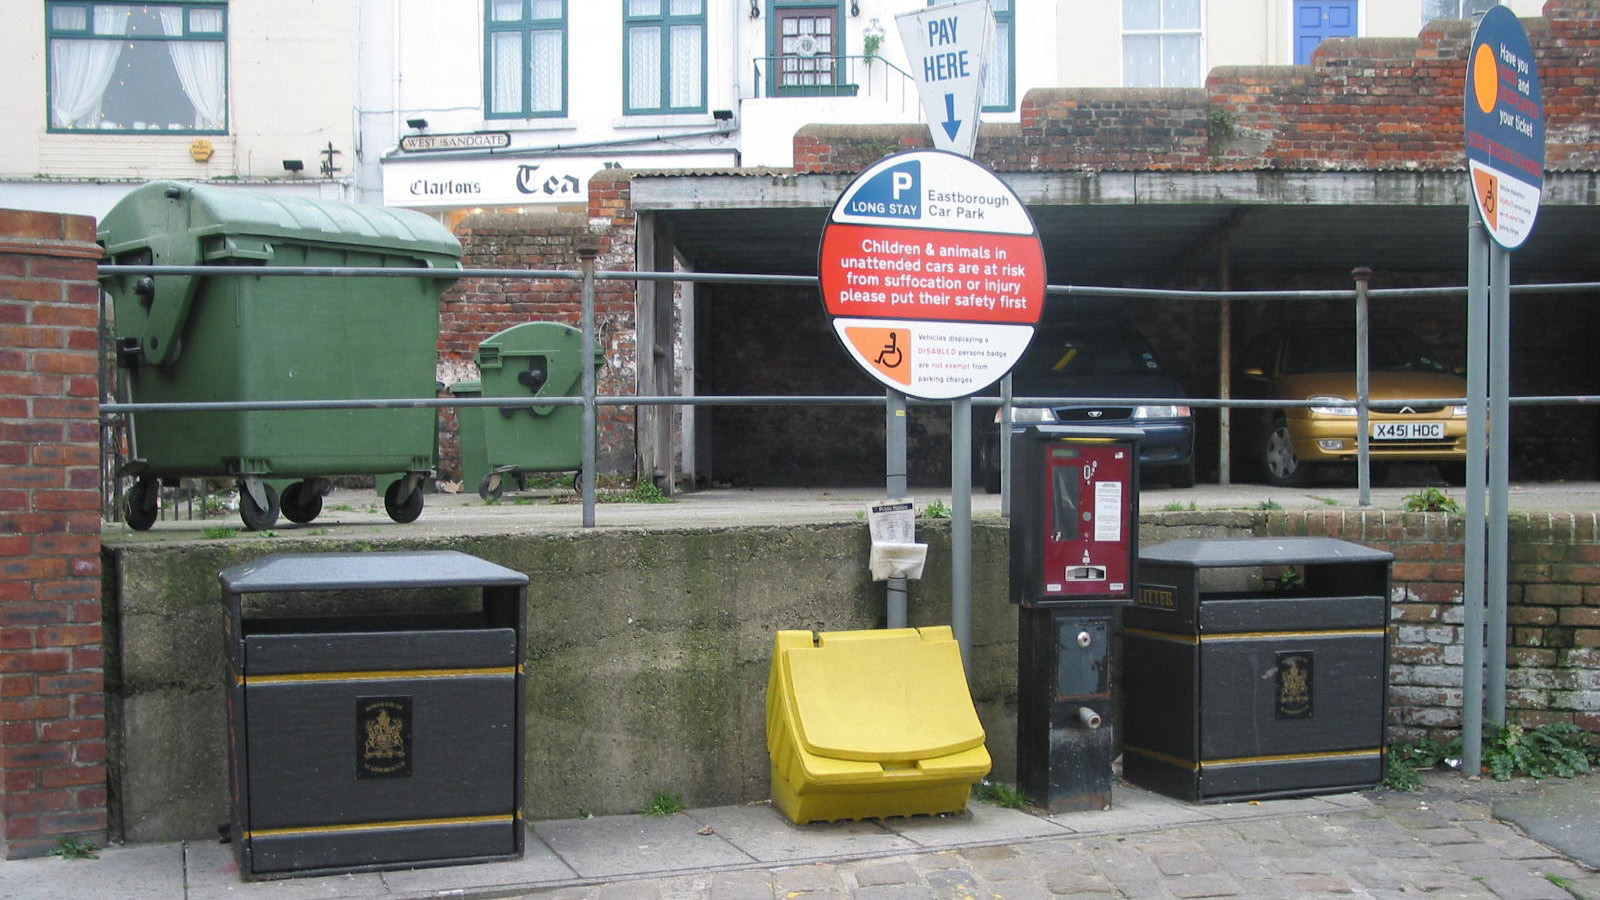 A cluster of bins, fences, signs poles and meters